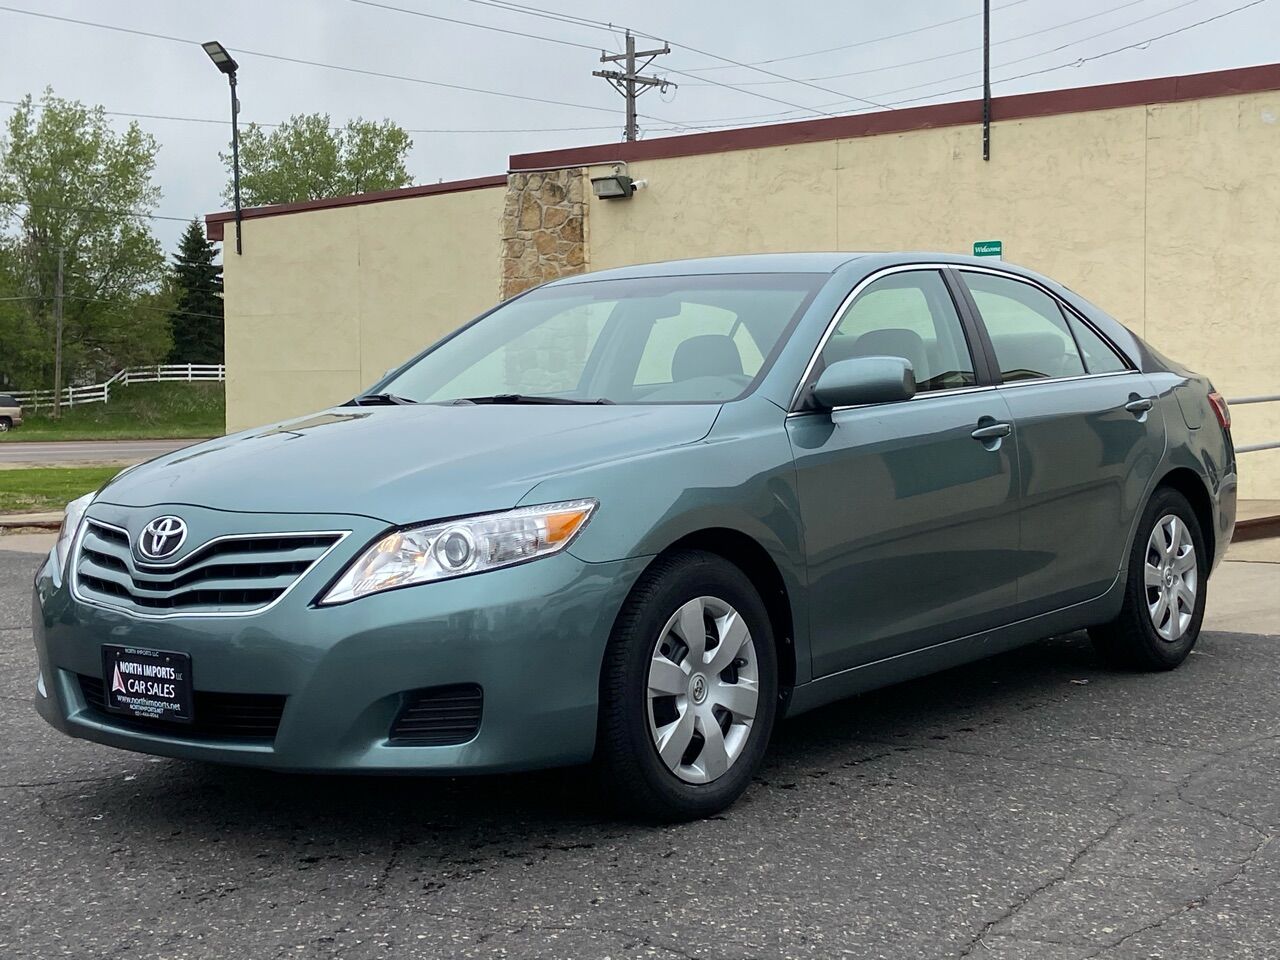 Used 2011 Toyota Camry For Sale Carsforsale com 174 